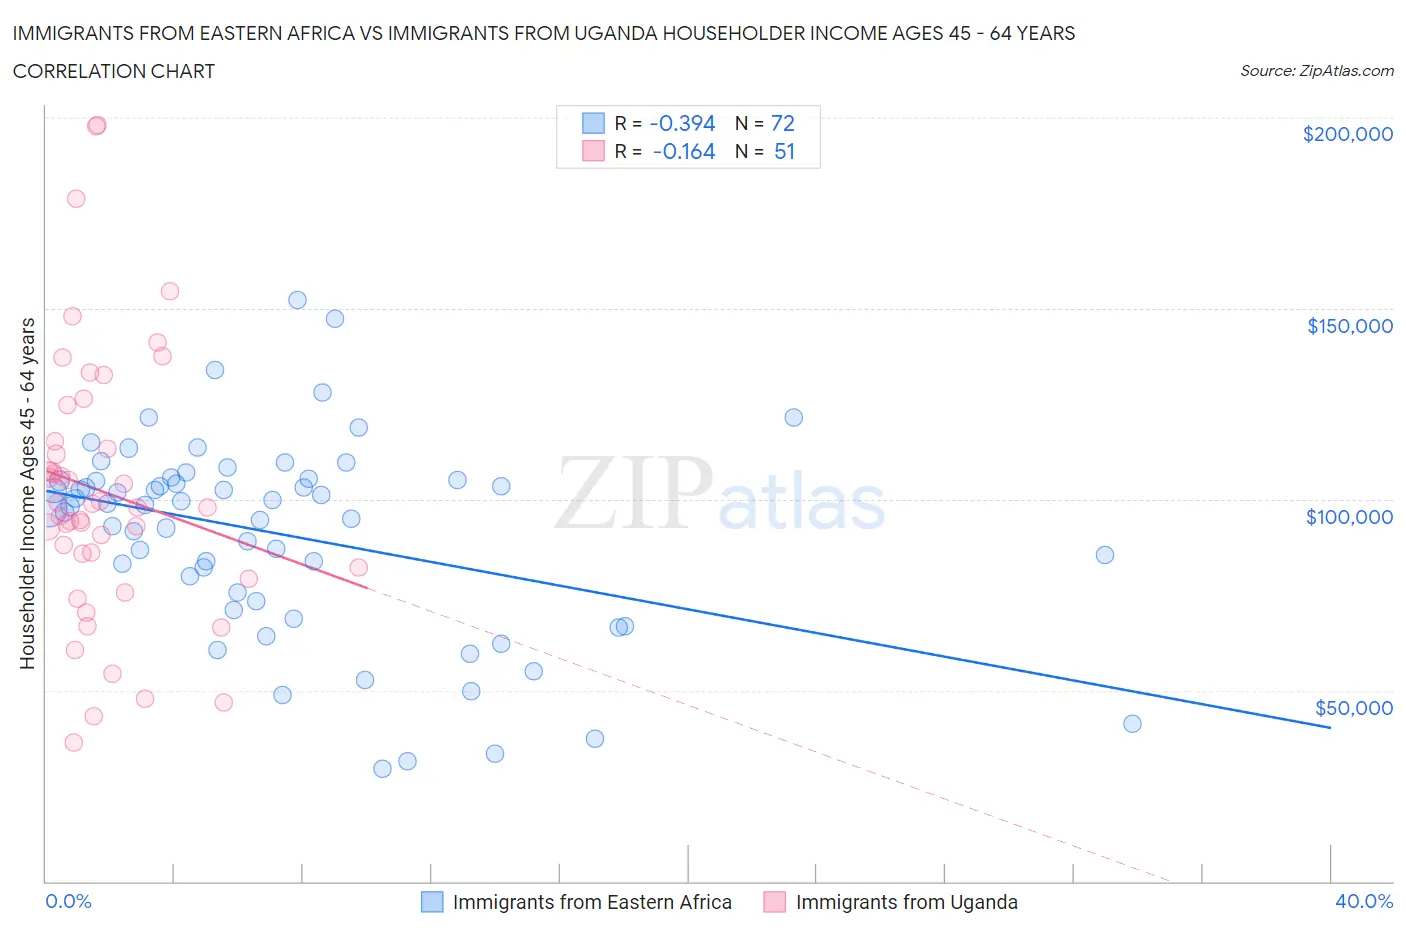 Immigrants from Eastern Africa vs Immigrants from Uganda Householder Income Ages 45 - 64 years